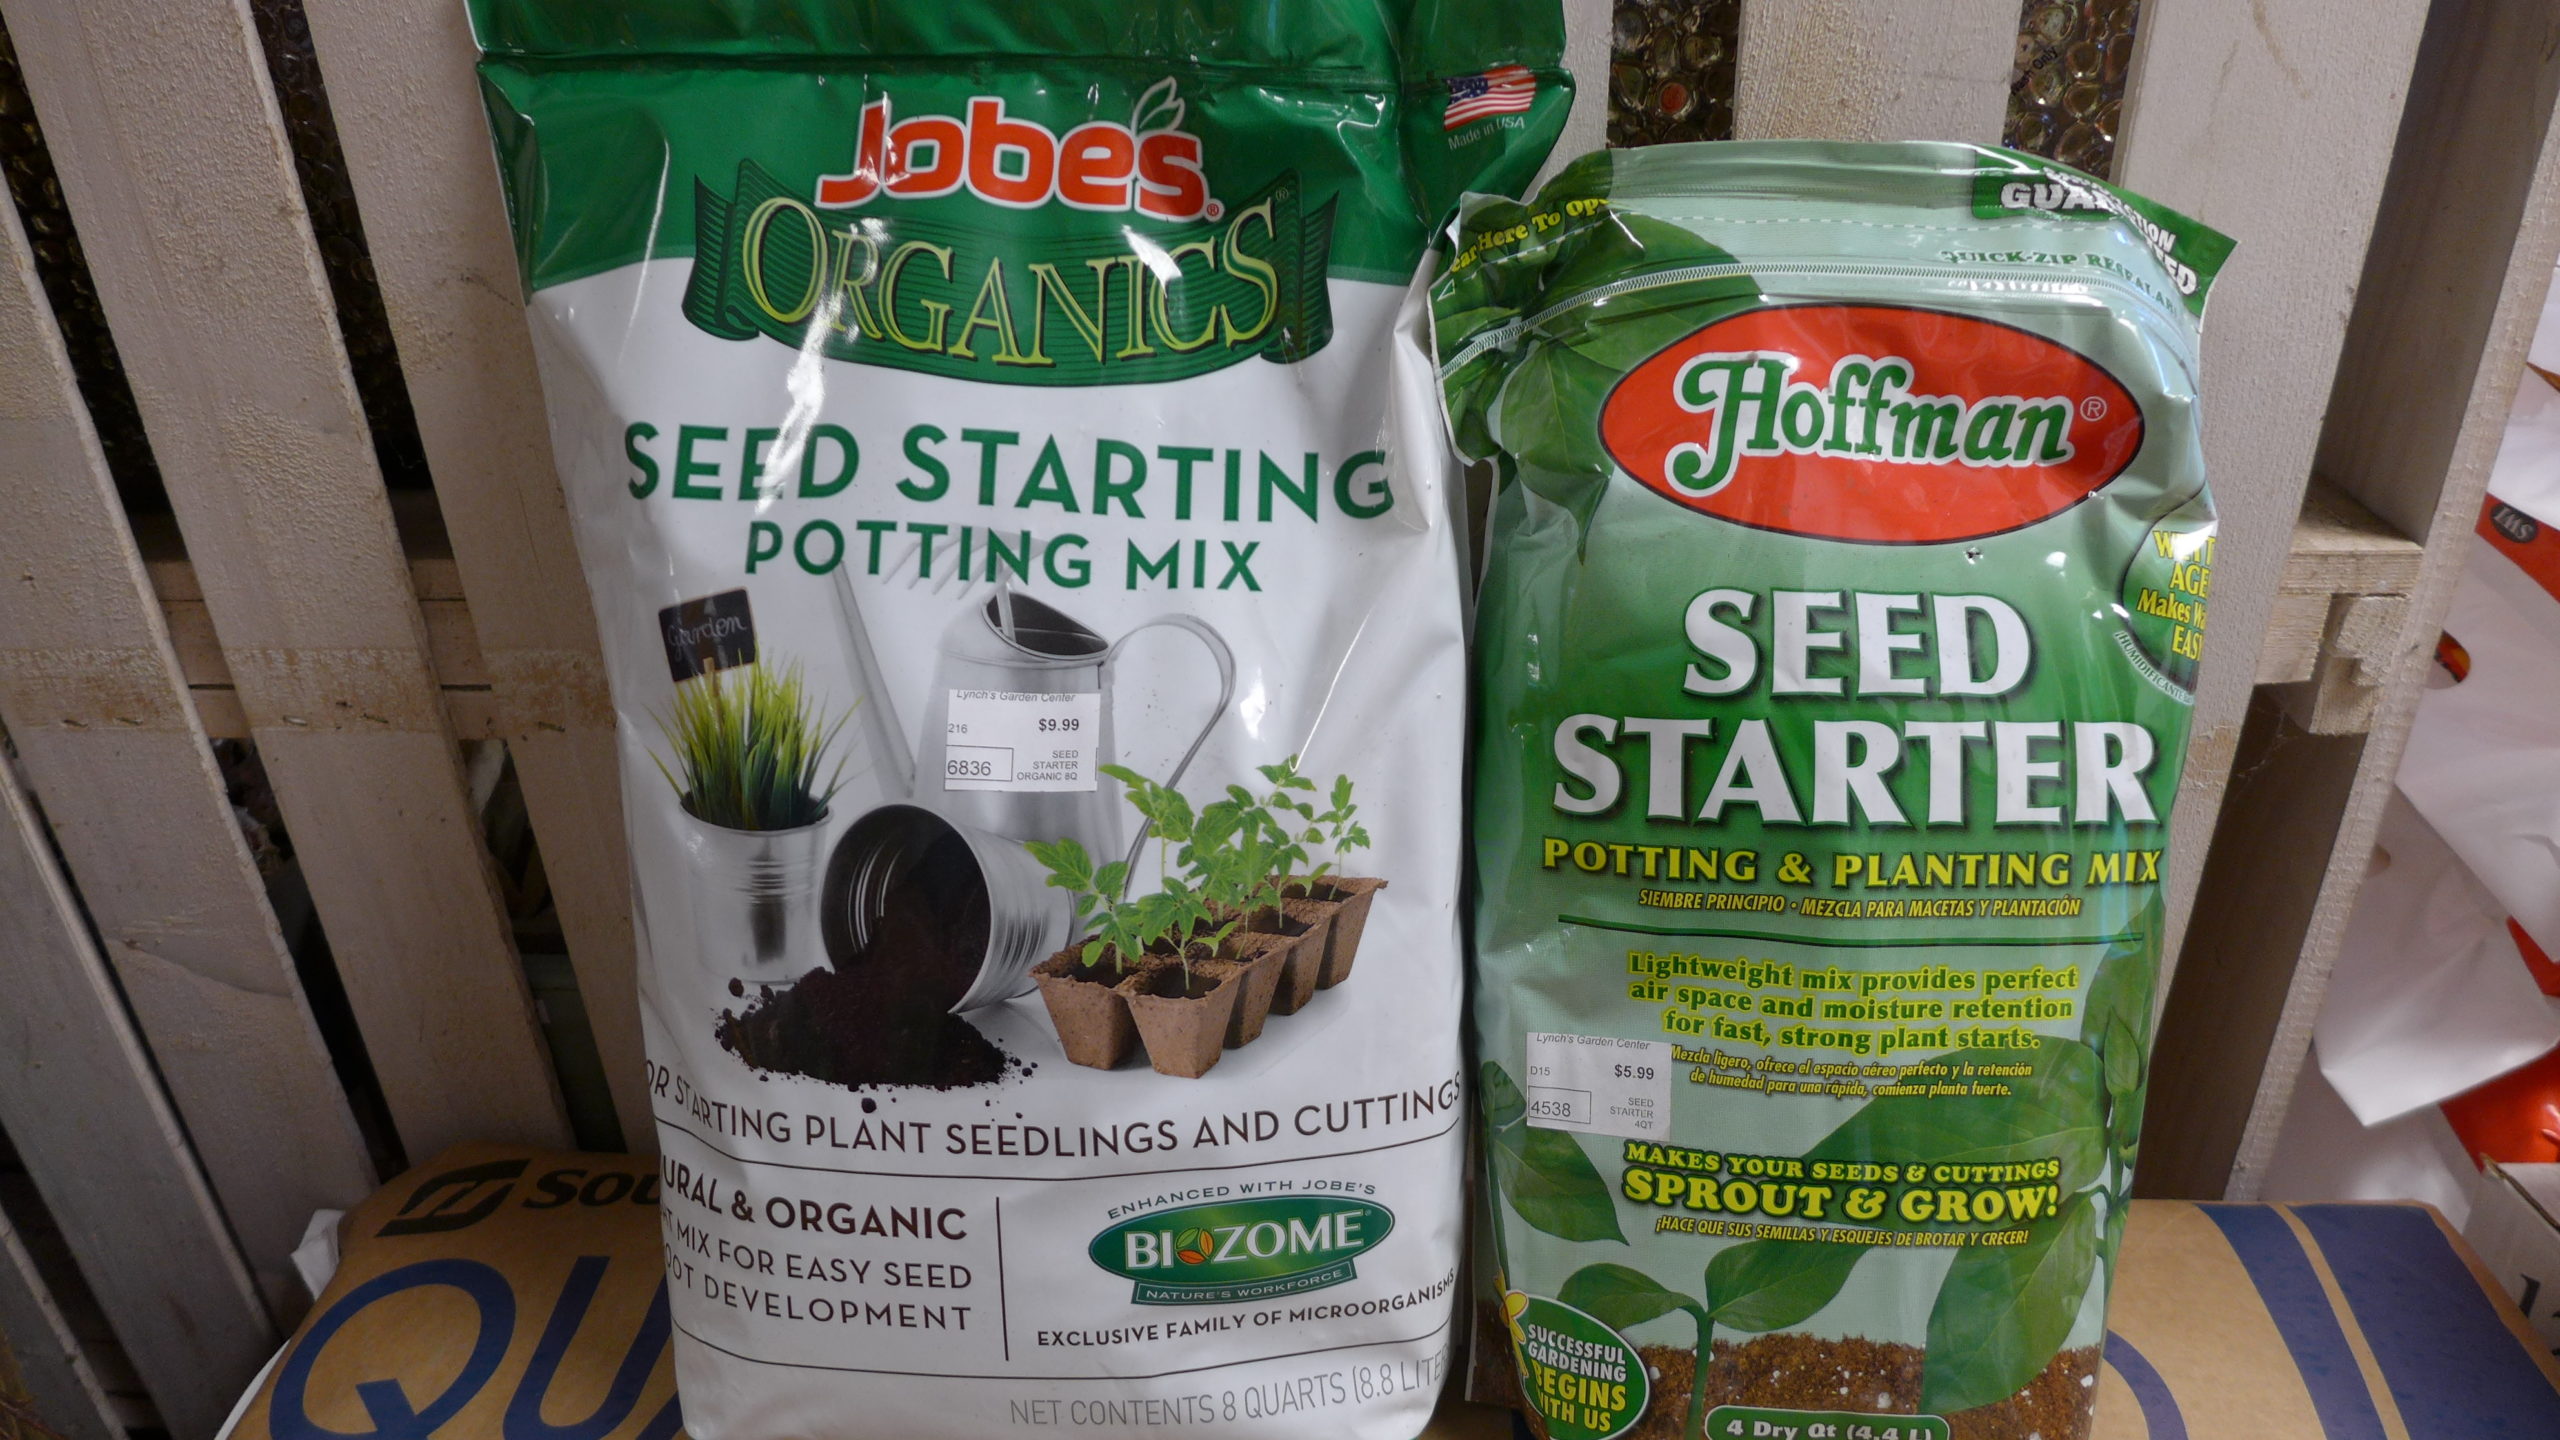 There are several brands of seed starting soils available and most gardeners have their favorite.  Never use potting soils, or garden soils, for seed germination, though.